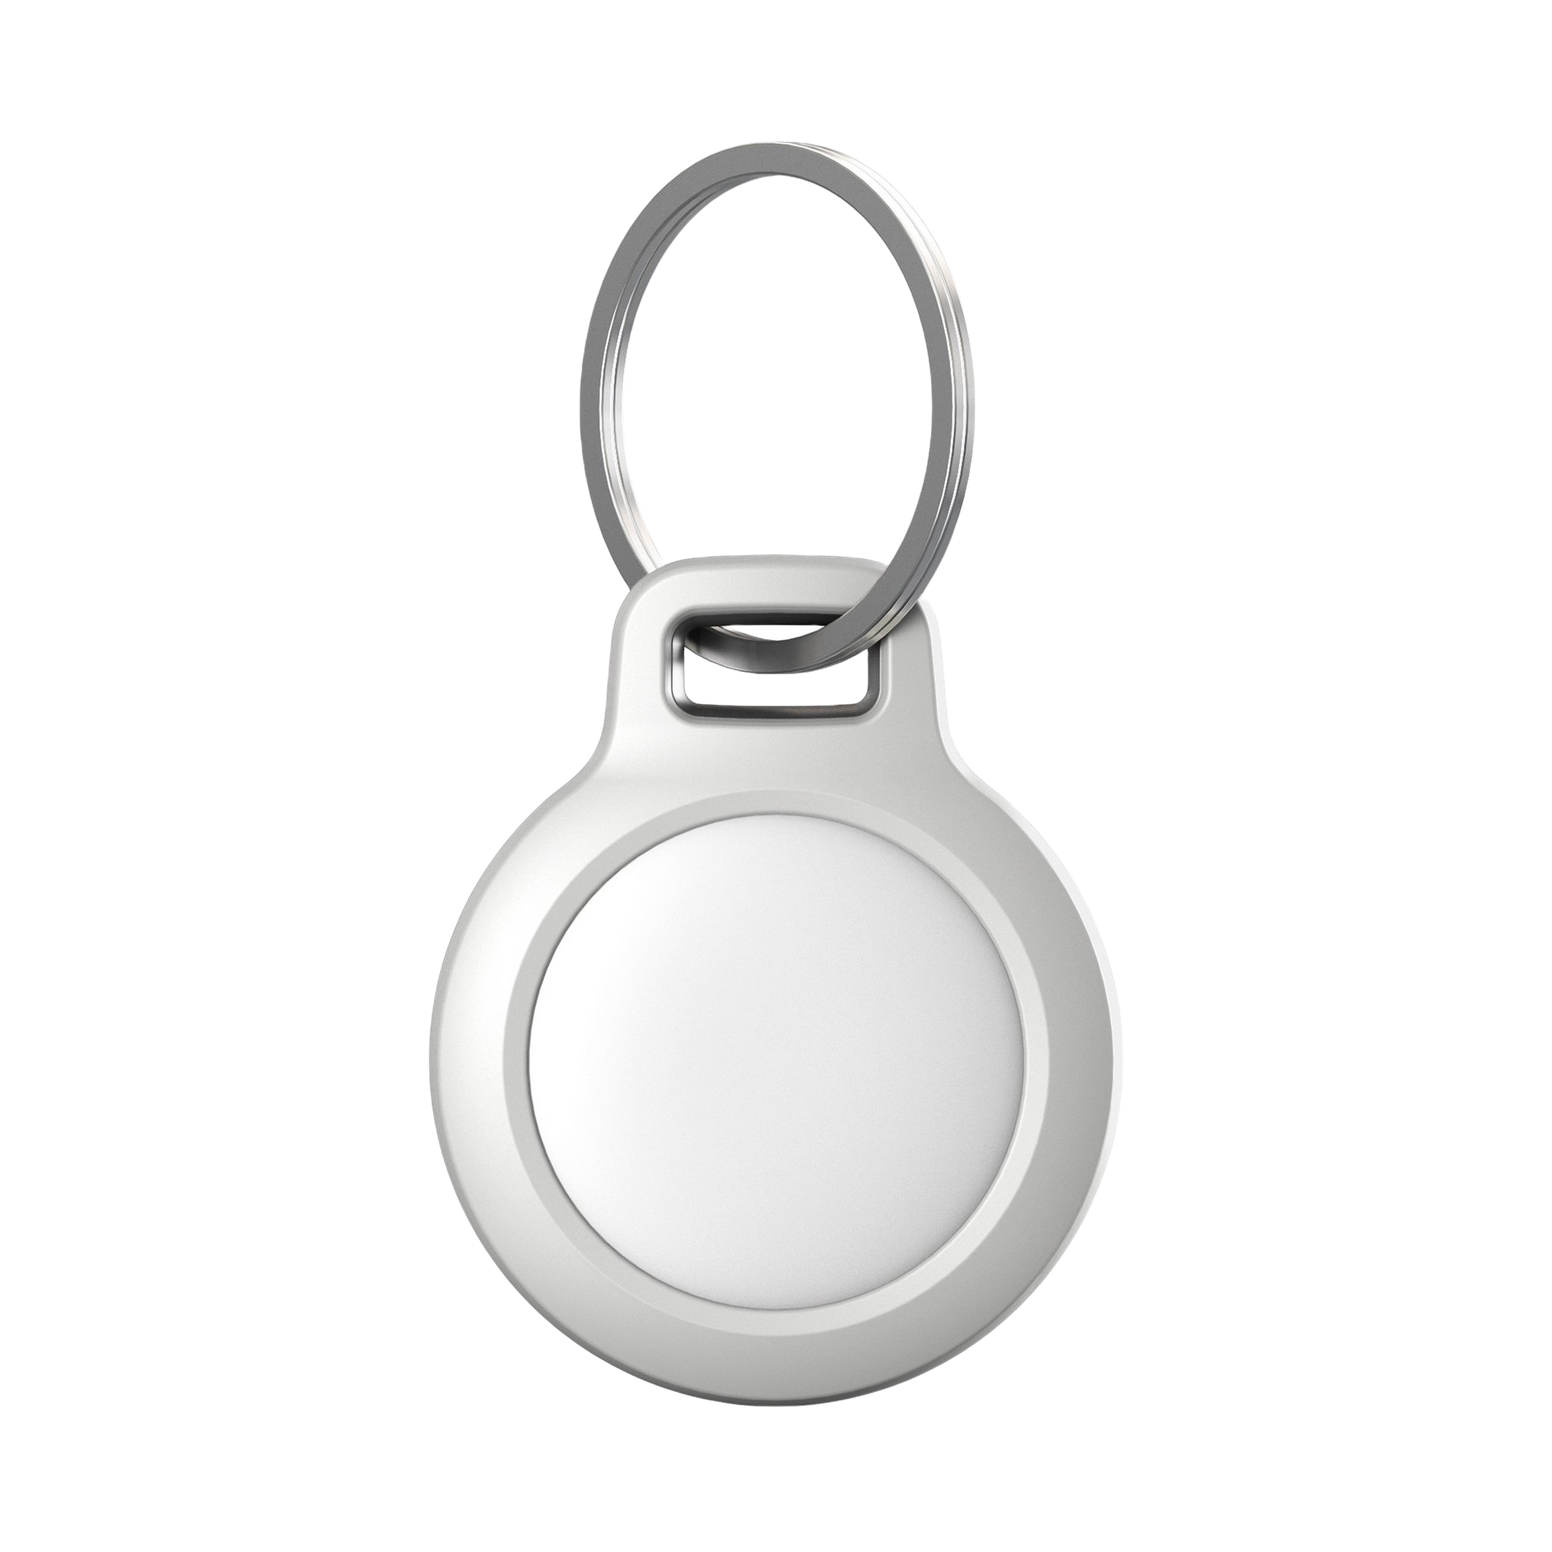 Nomad Rugged AirTag Pet Tag - White - Discontinued